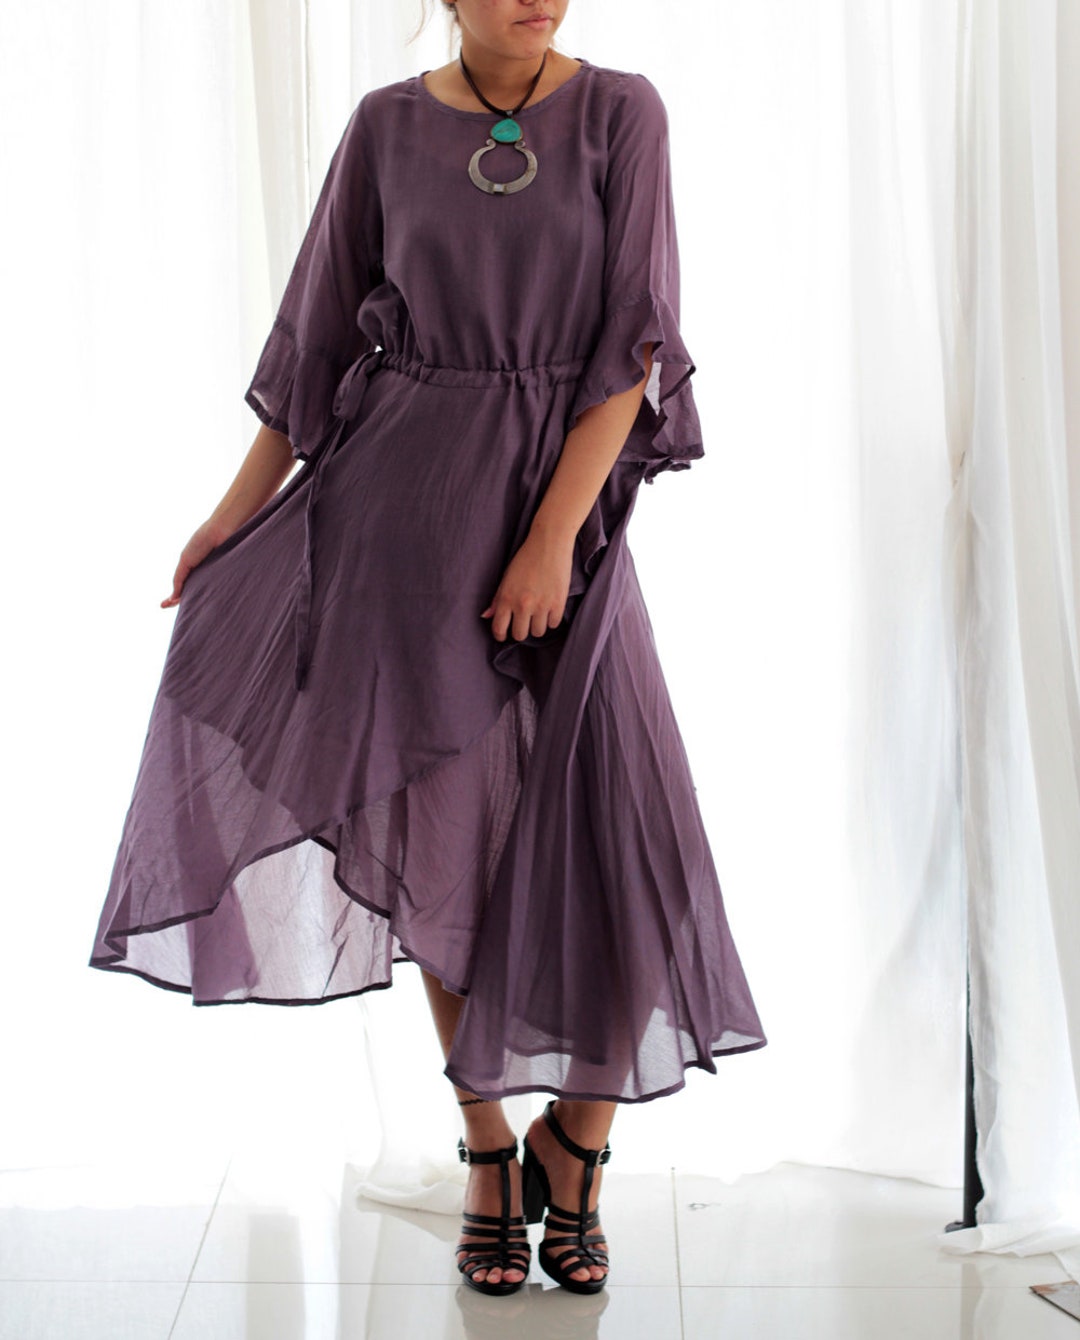 Dress Lavender Mixed Silk one Size Fits S-L1182 - Etsy Canada